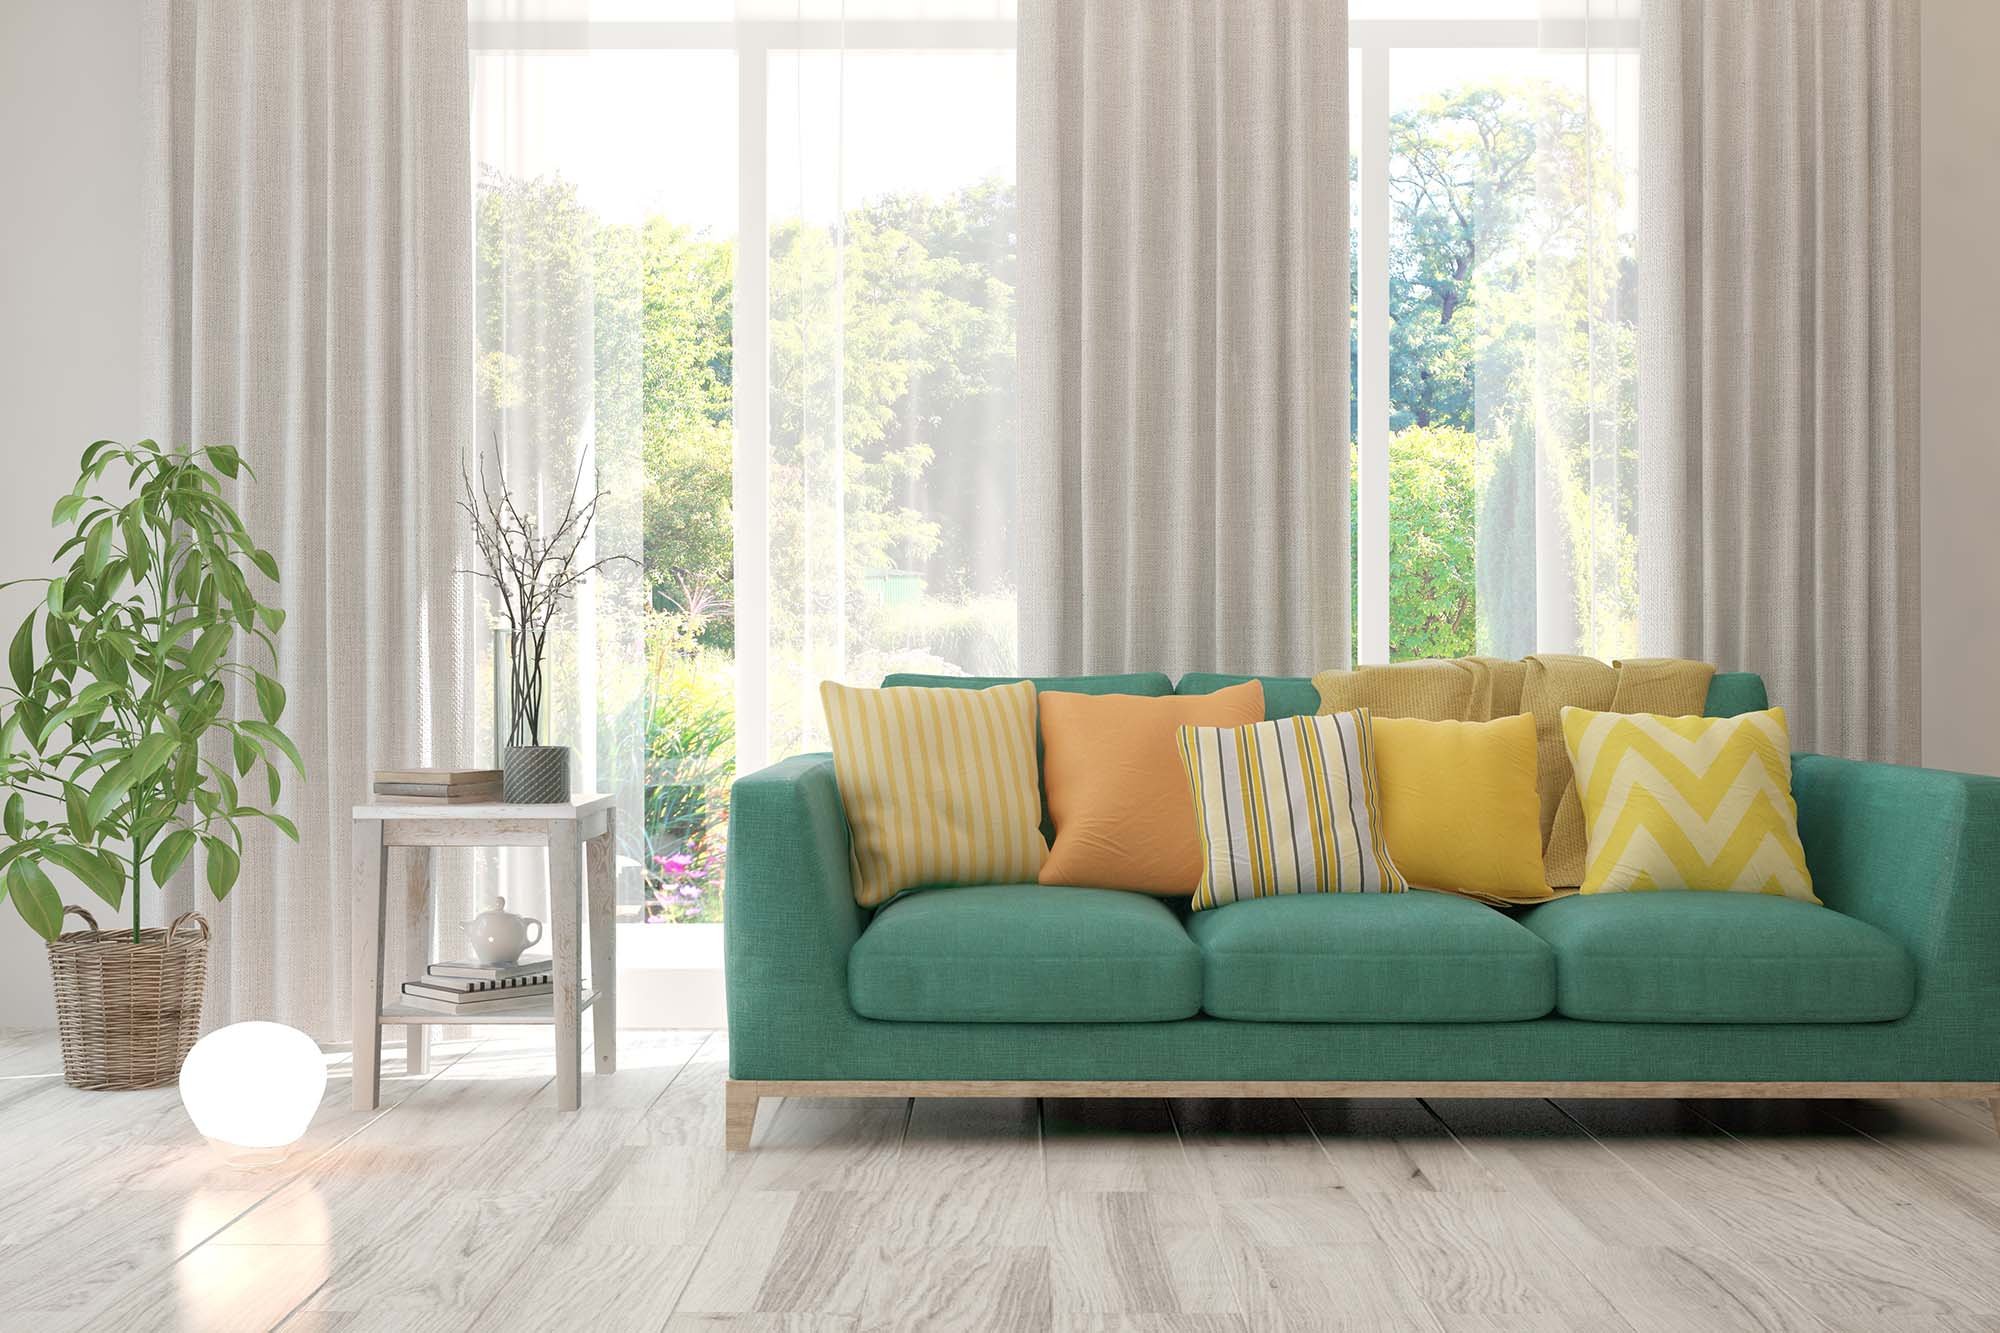 Three looks you can have with luxury vinyl flooring